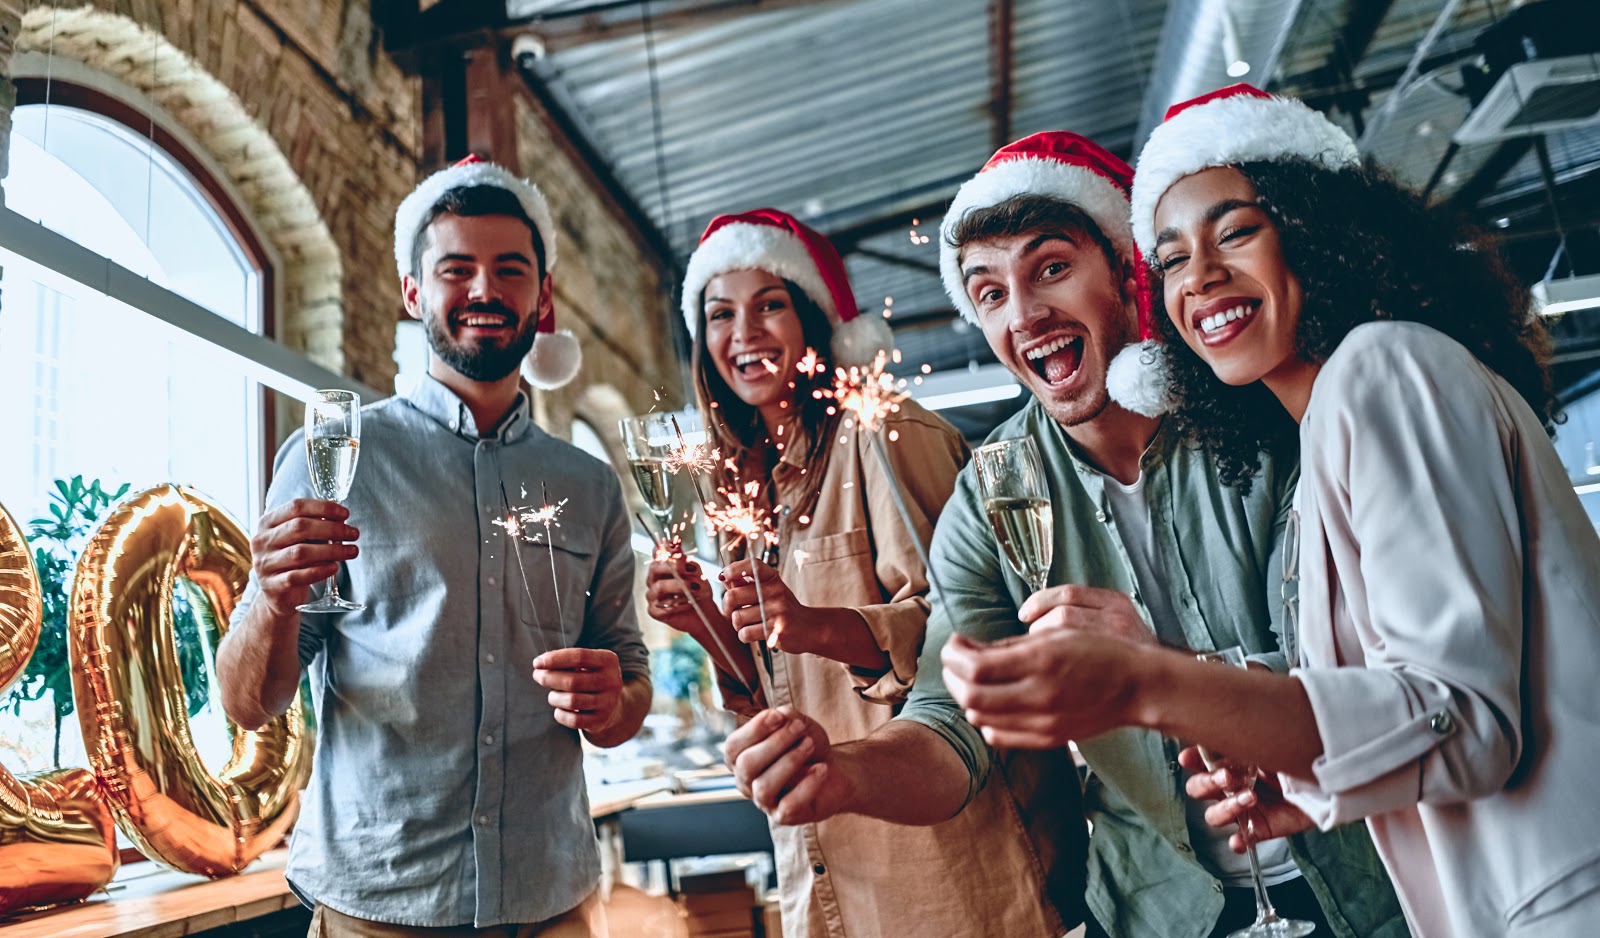 Company Christmas party ideas: A group of coworkers hold champagne glasses at an office holiday party